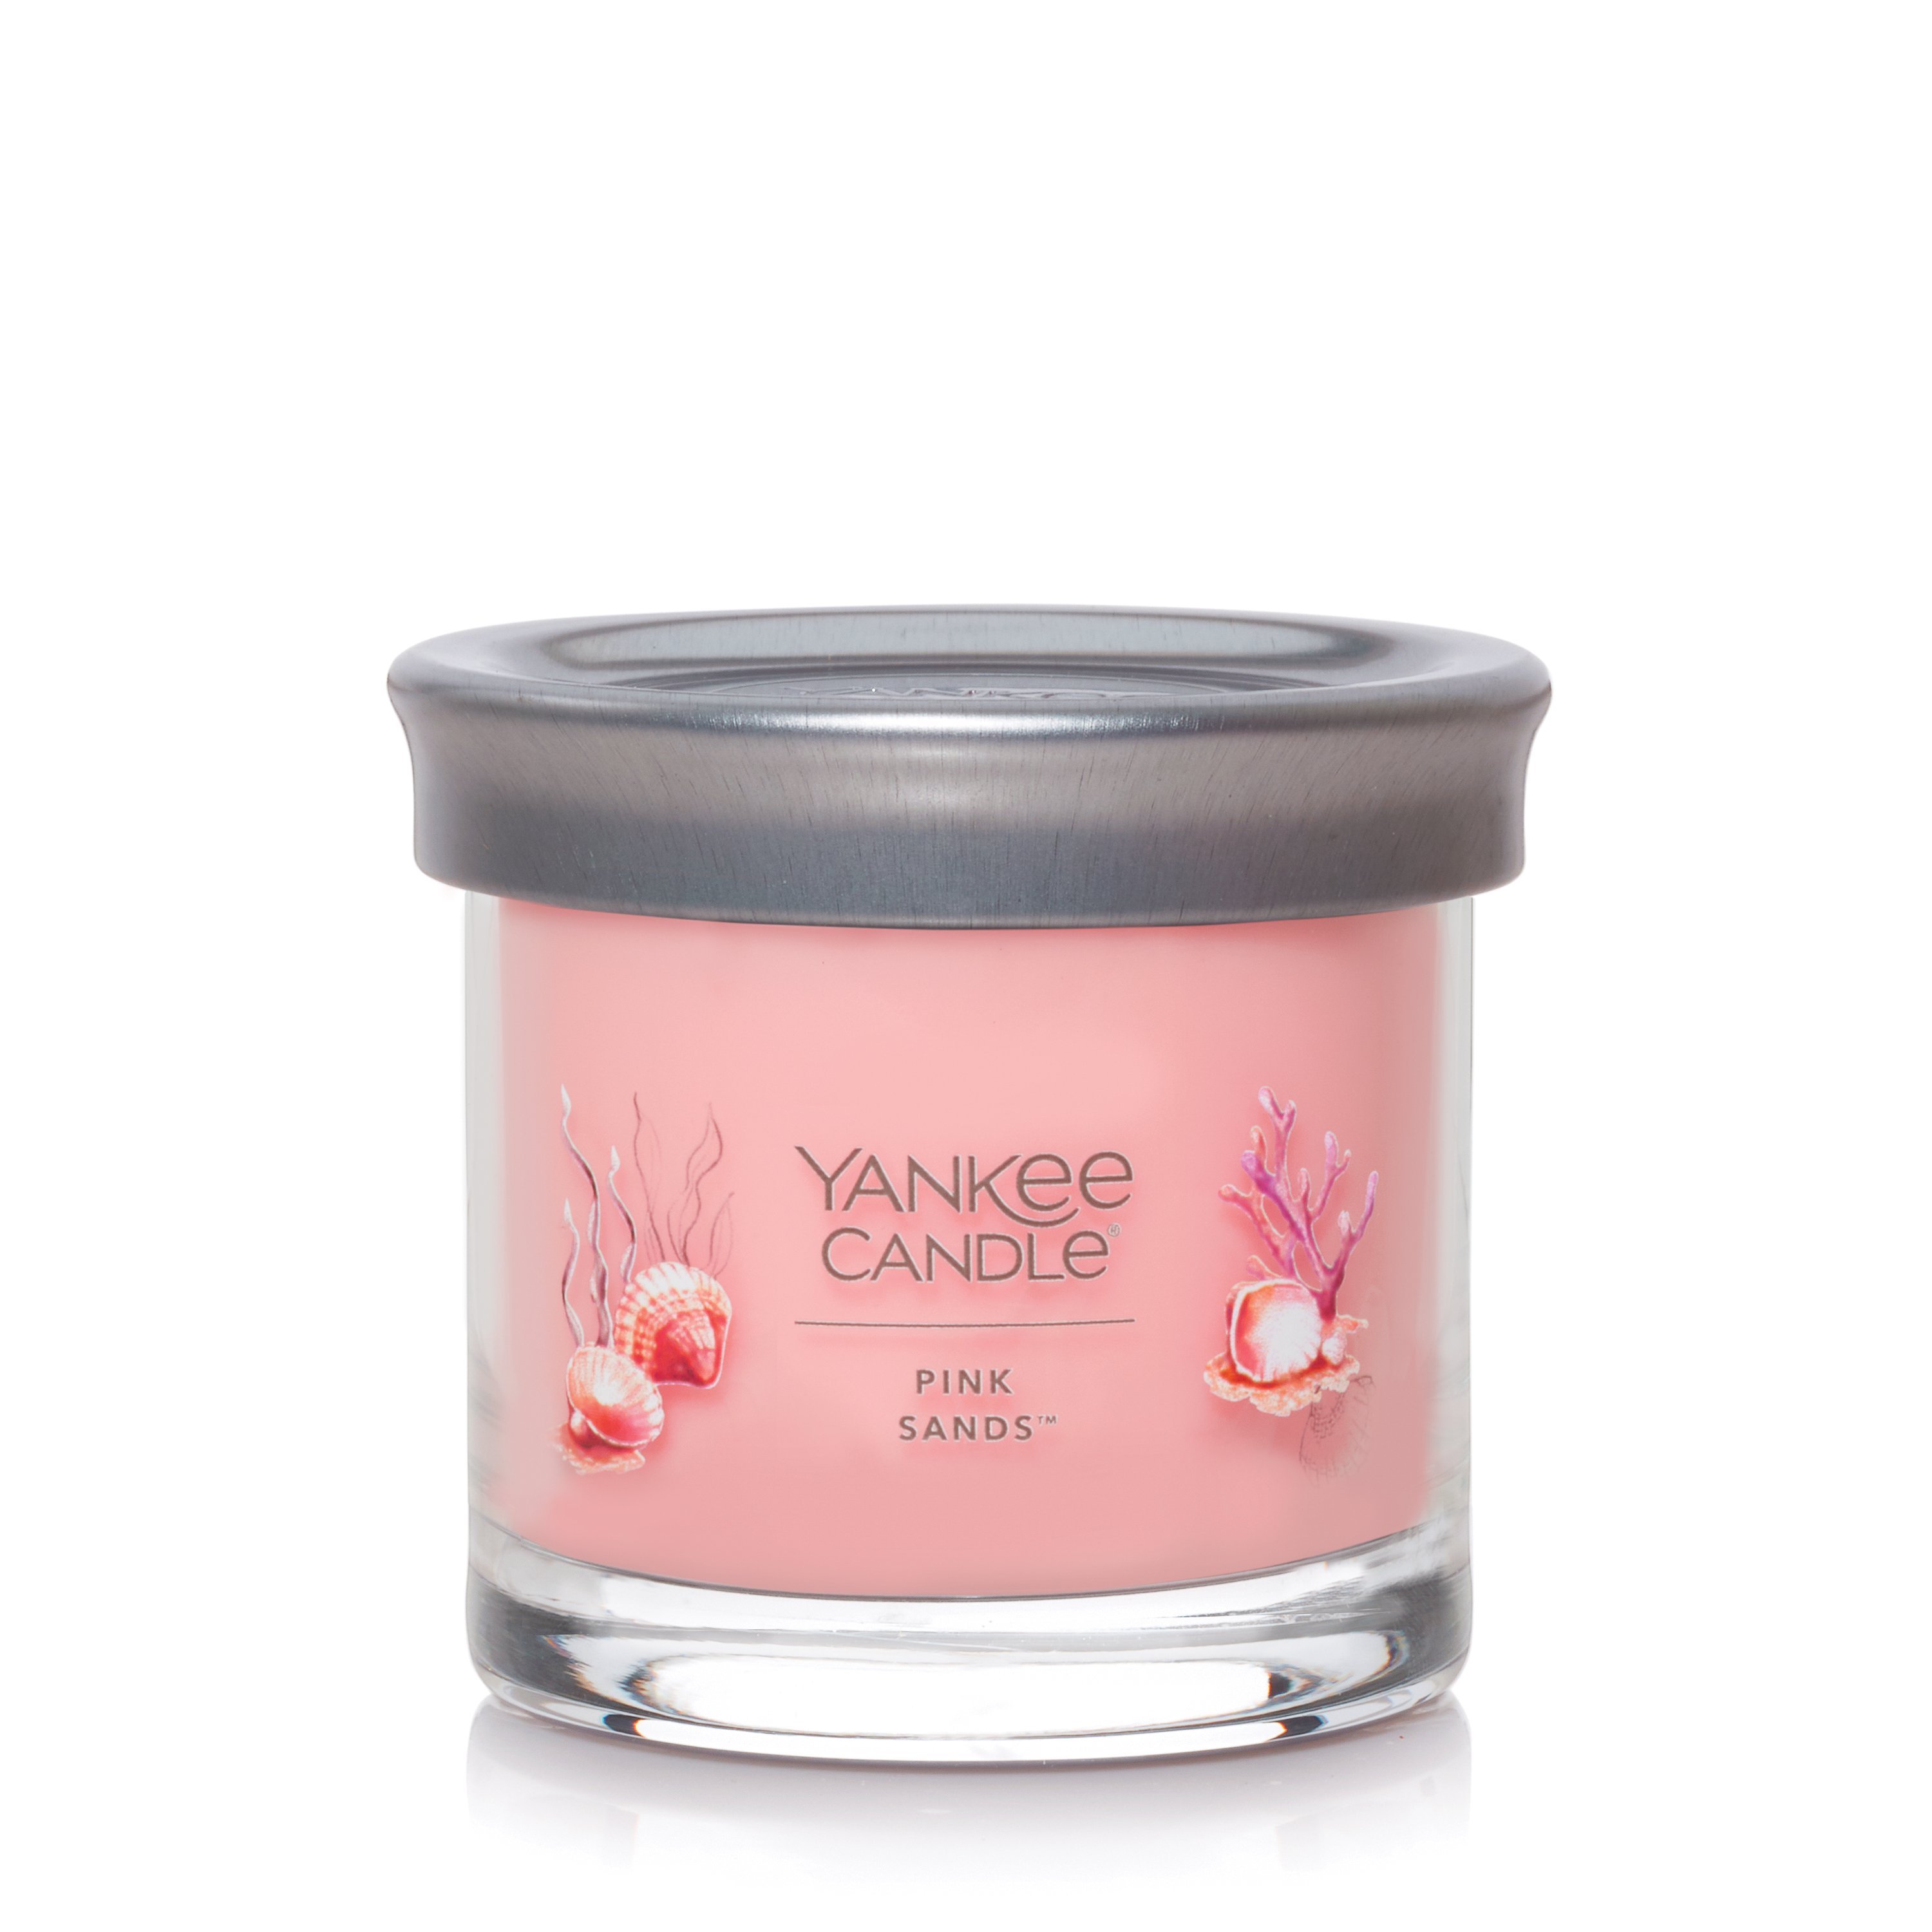 Yankee Candle Pink Sands Scenterpiece Melt Cup - Scented Wax